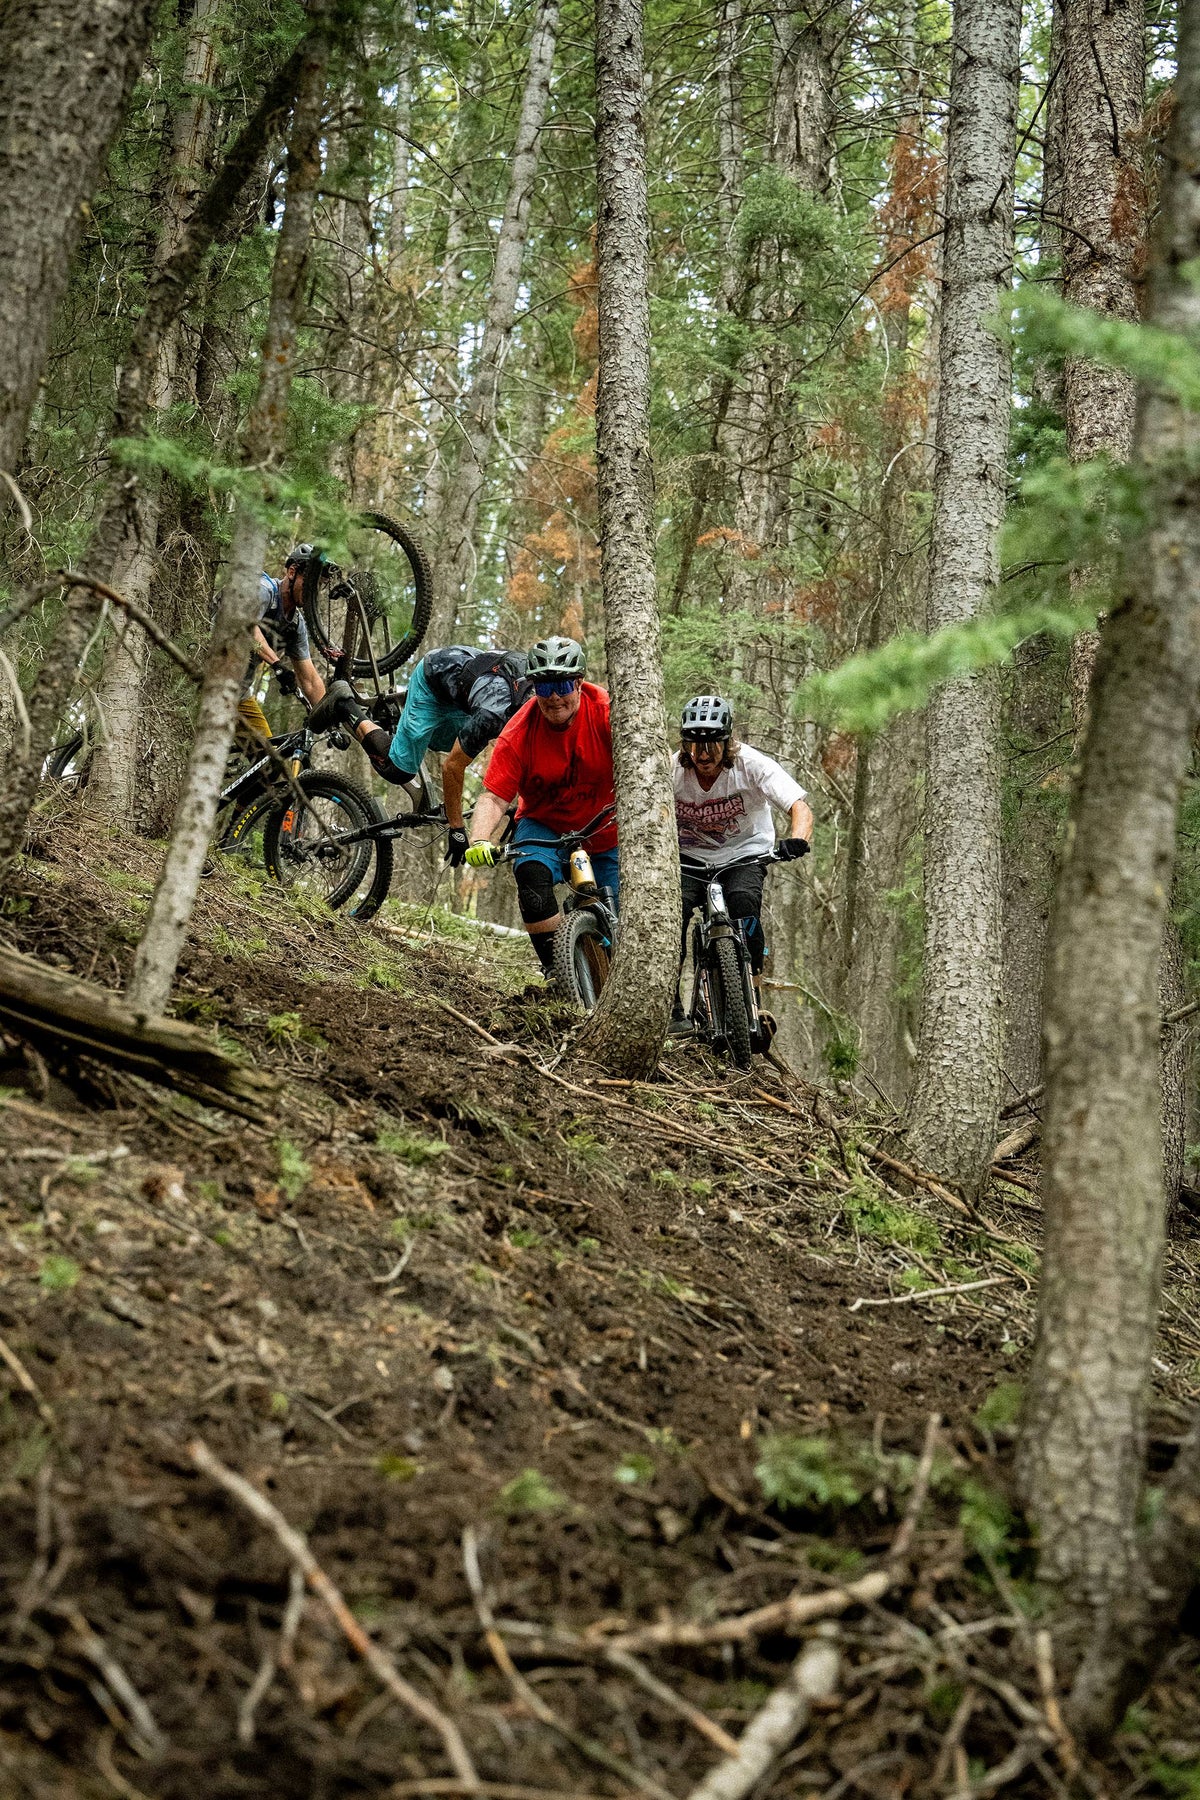 a group of bike trail riders on a forest trail in trees